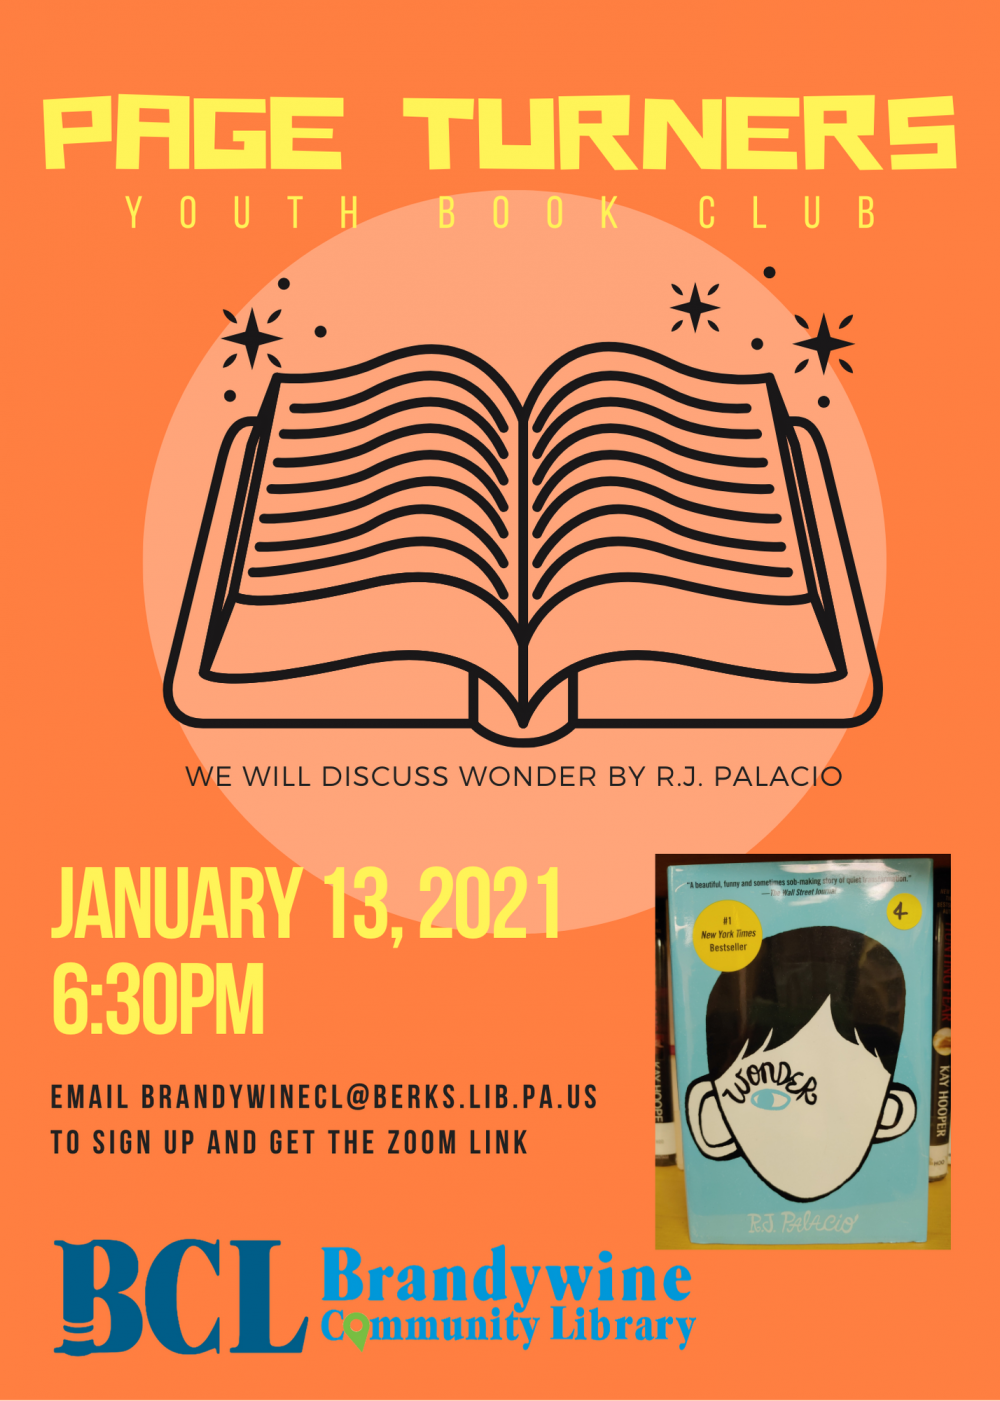 youth book club flyer for Wonder title